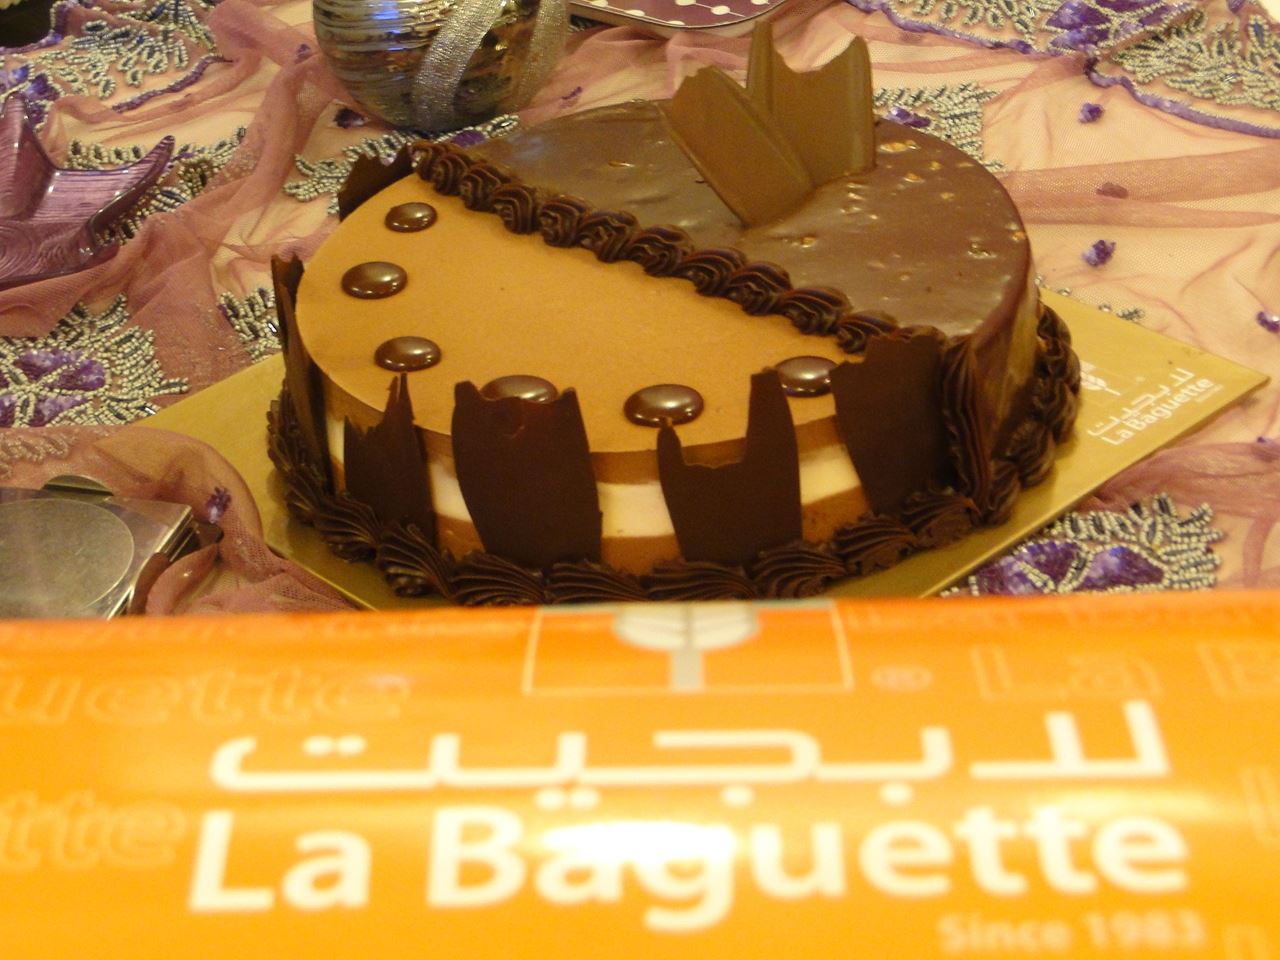 Chocolate cake and croissants from La Baguette